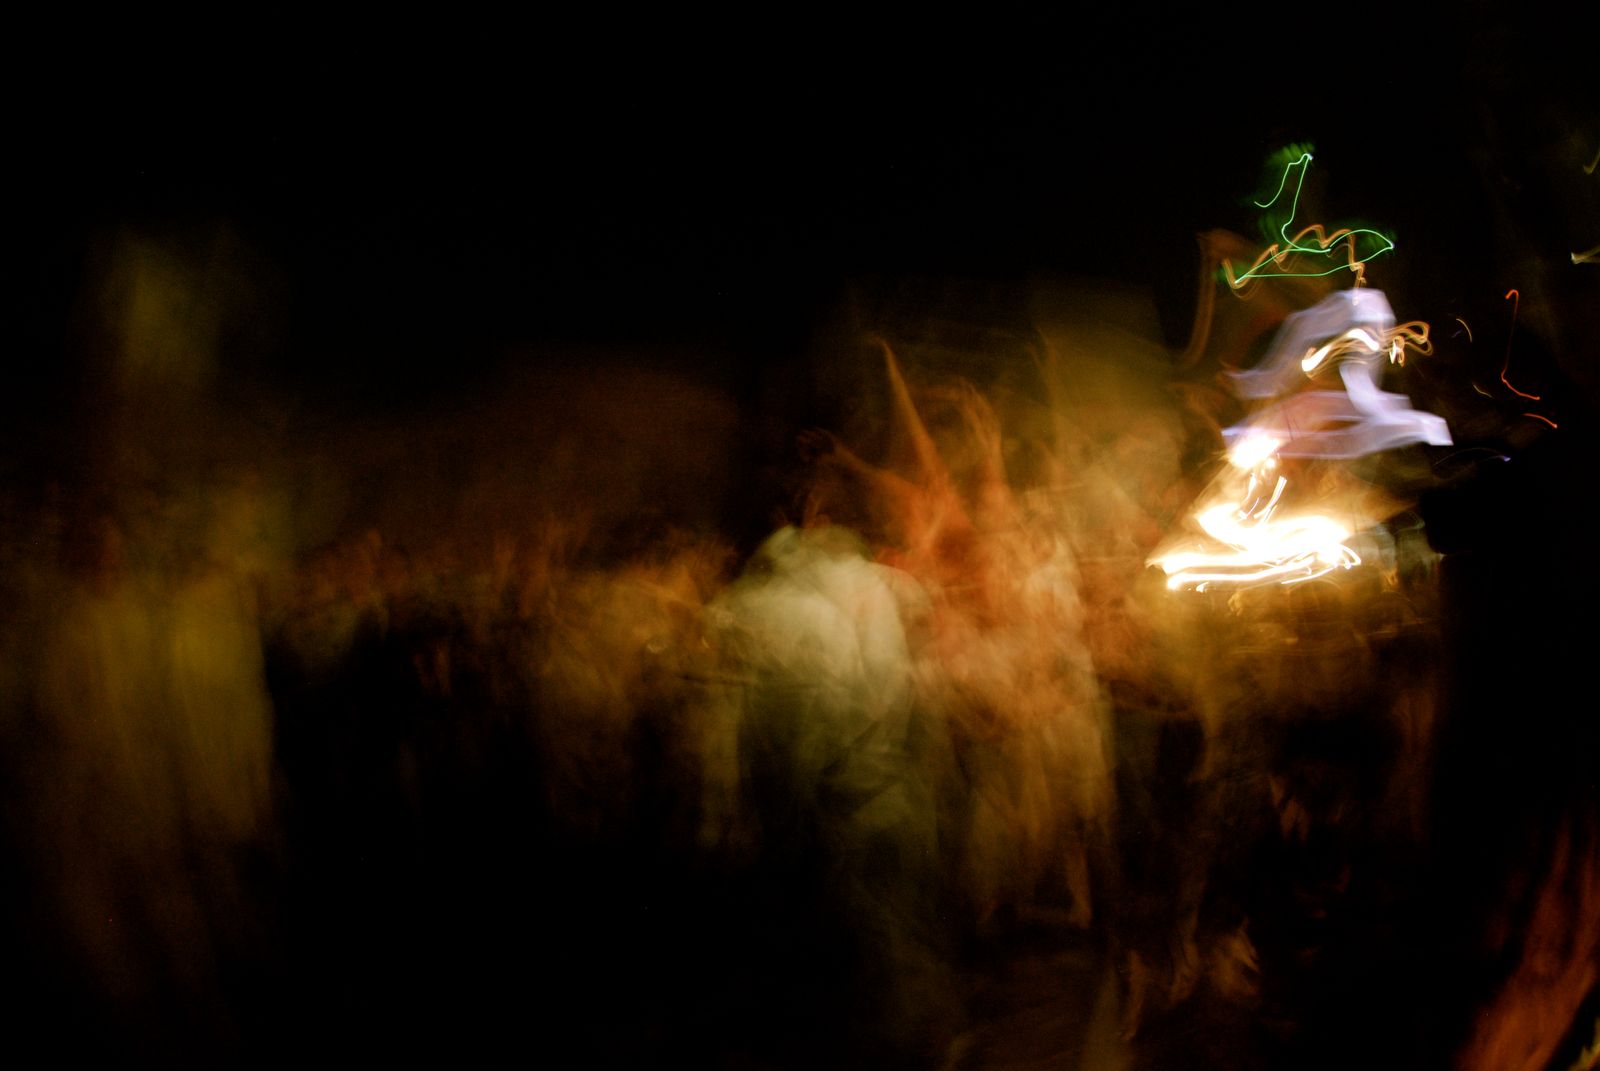 © Nazia Akram - Image from the Spiritual Transcendence - Sufism in Pakistan photography project